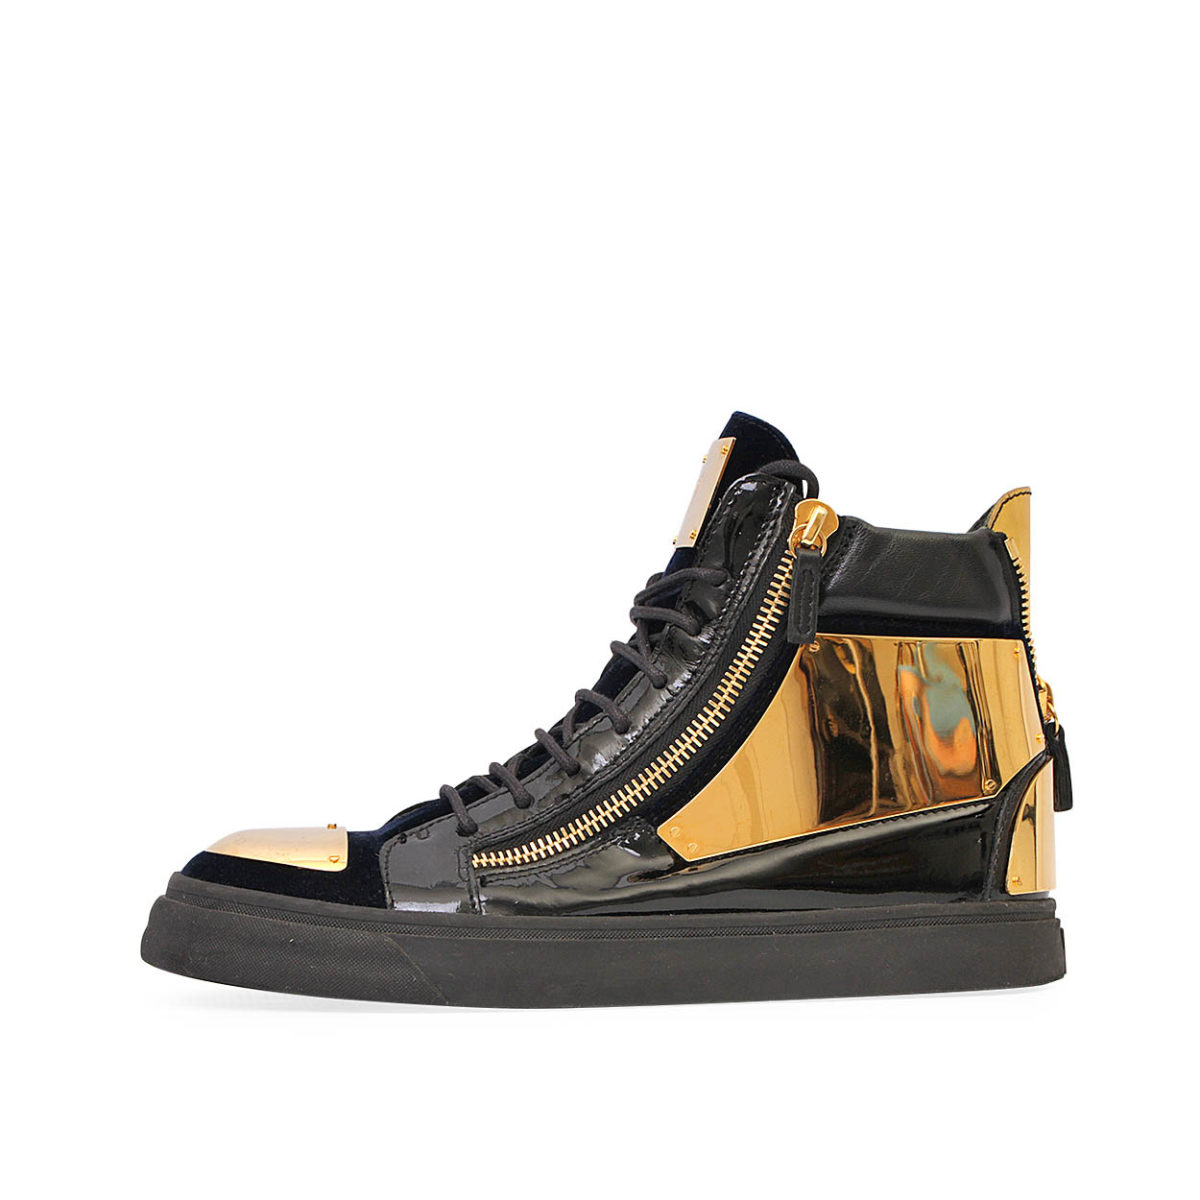 GIUSEPPE ZANOTTI Leather/Suede Gold Plate Sneakers Black/Gold - S: 41.5 ...